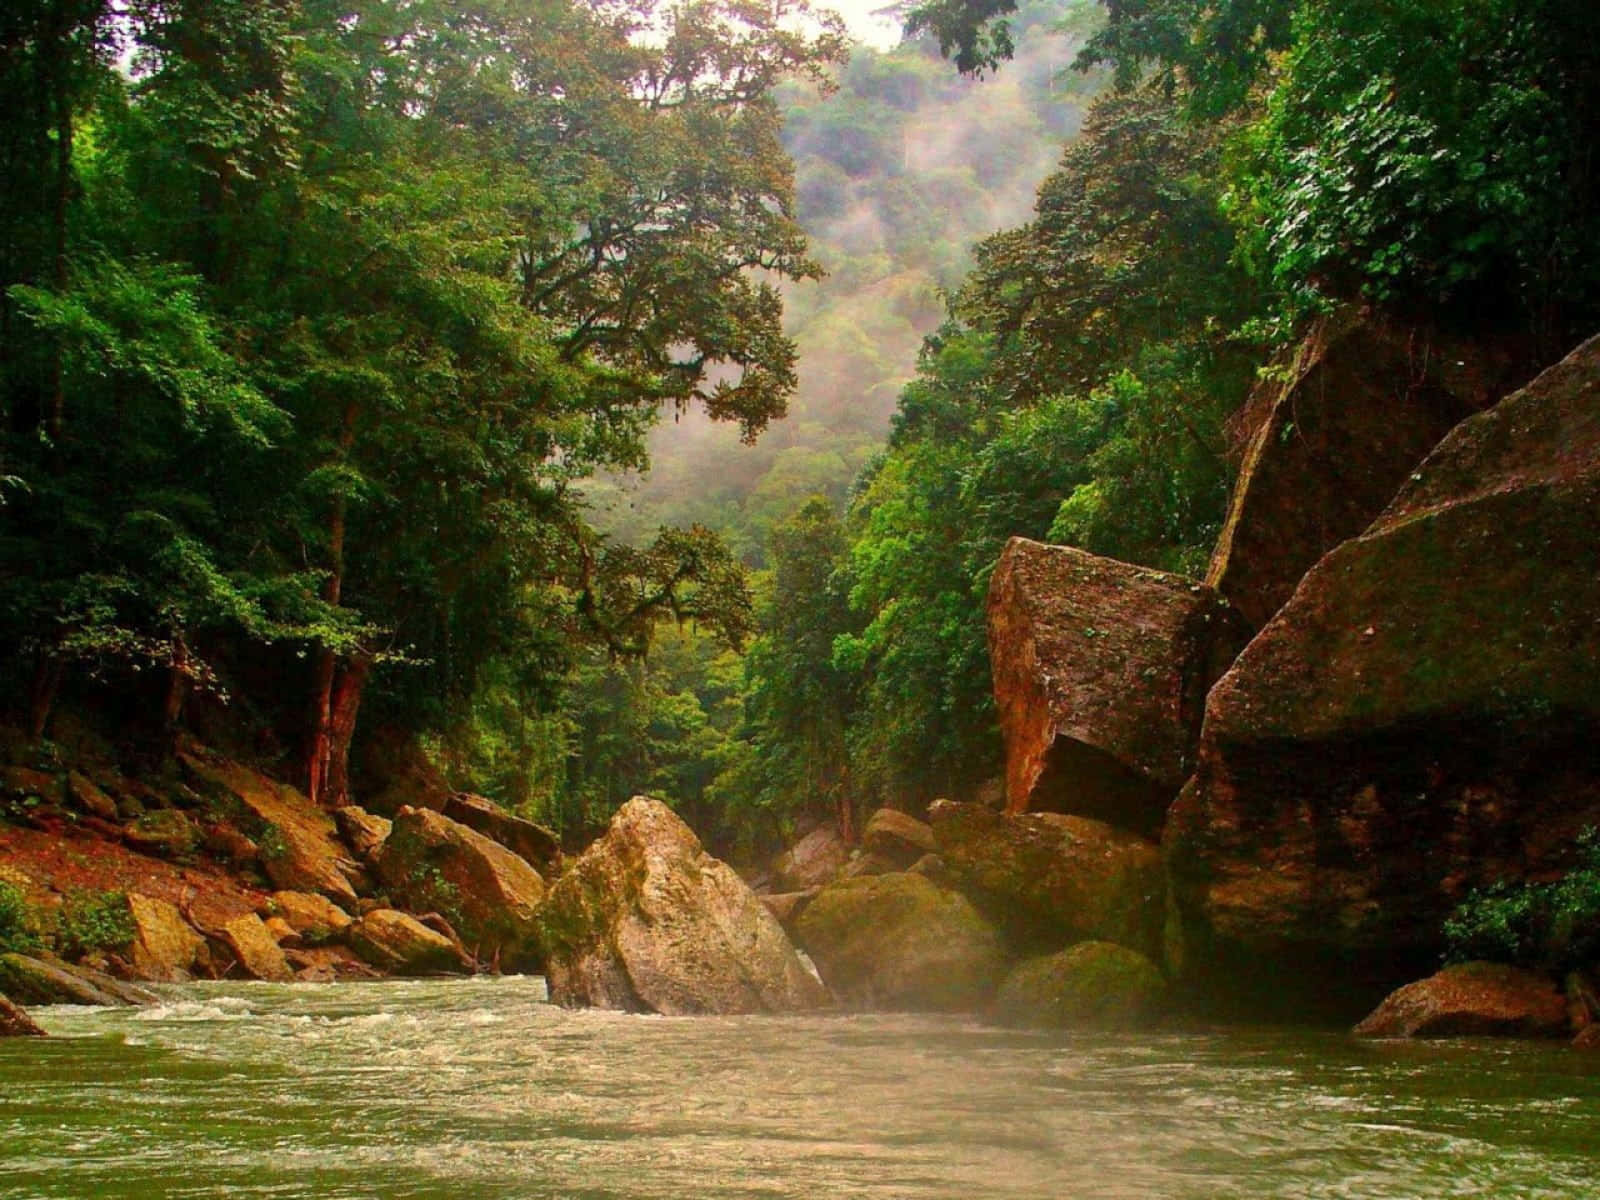 A River In The Jungle With Rocks And Trees